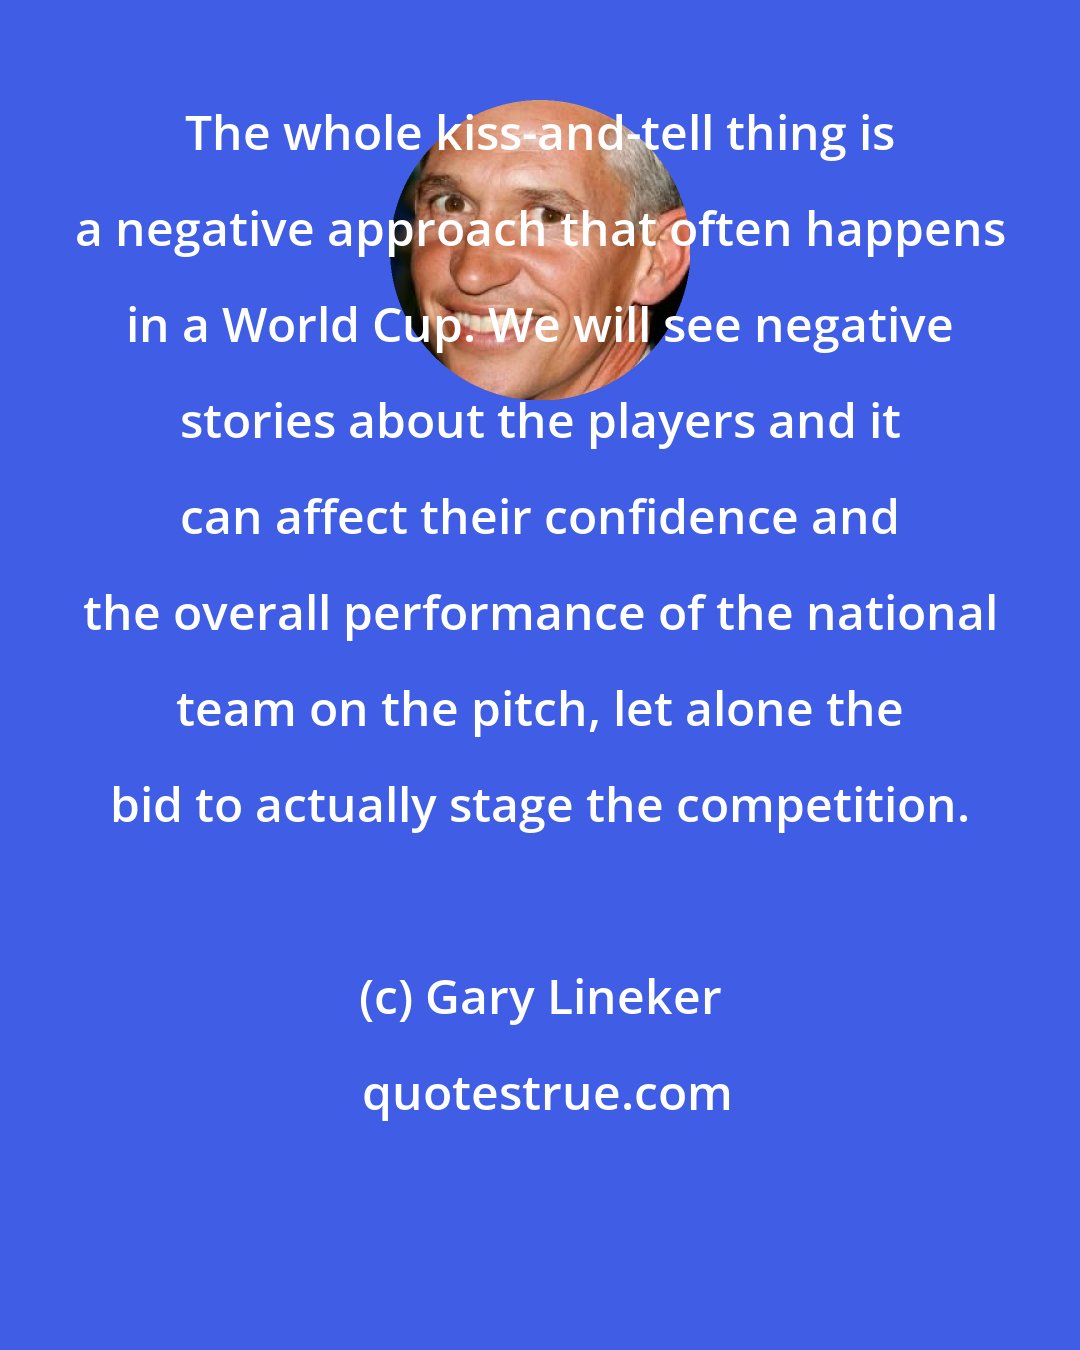 Gary Lineker: The whole kiss-and-tell thing is a negative approach that often happens in a World Cup. We will see negative stories about the players and it can affect their confidence and the overall performance of the national team on the pitch, let alone the bid to actually stage the competition.